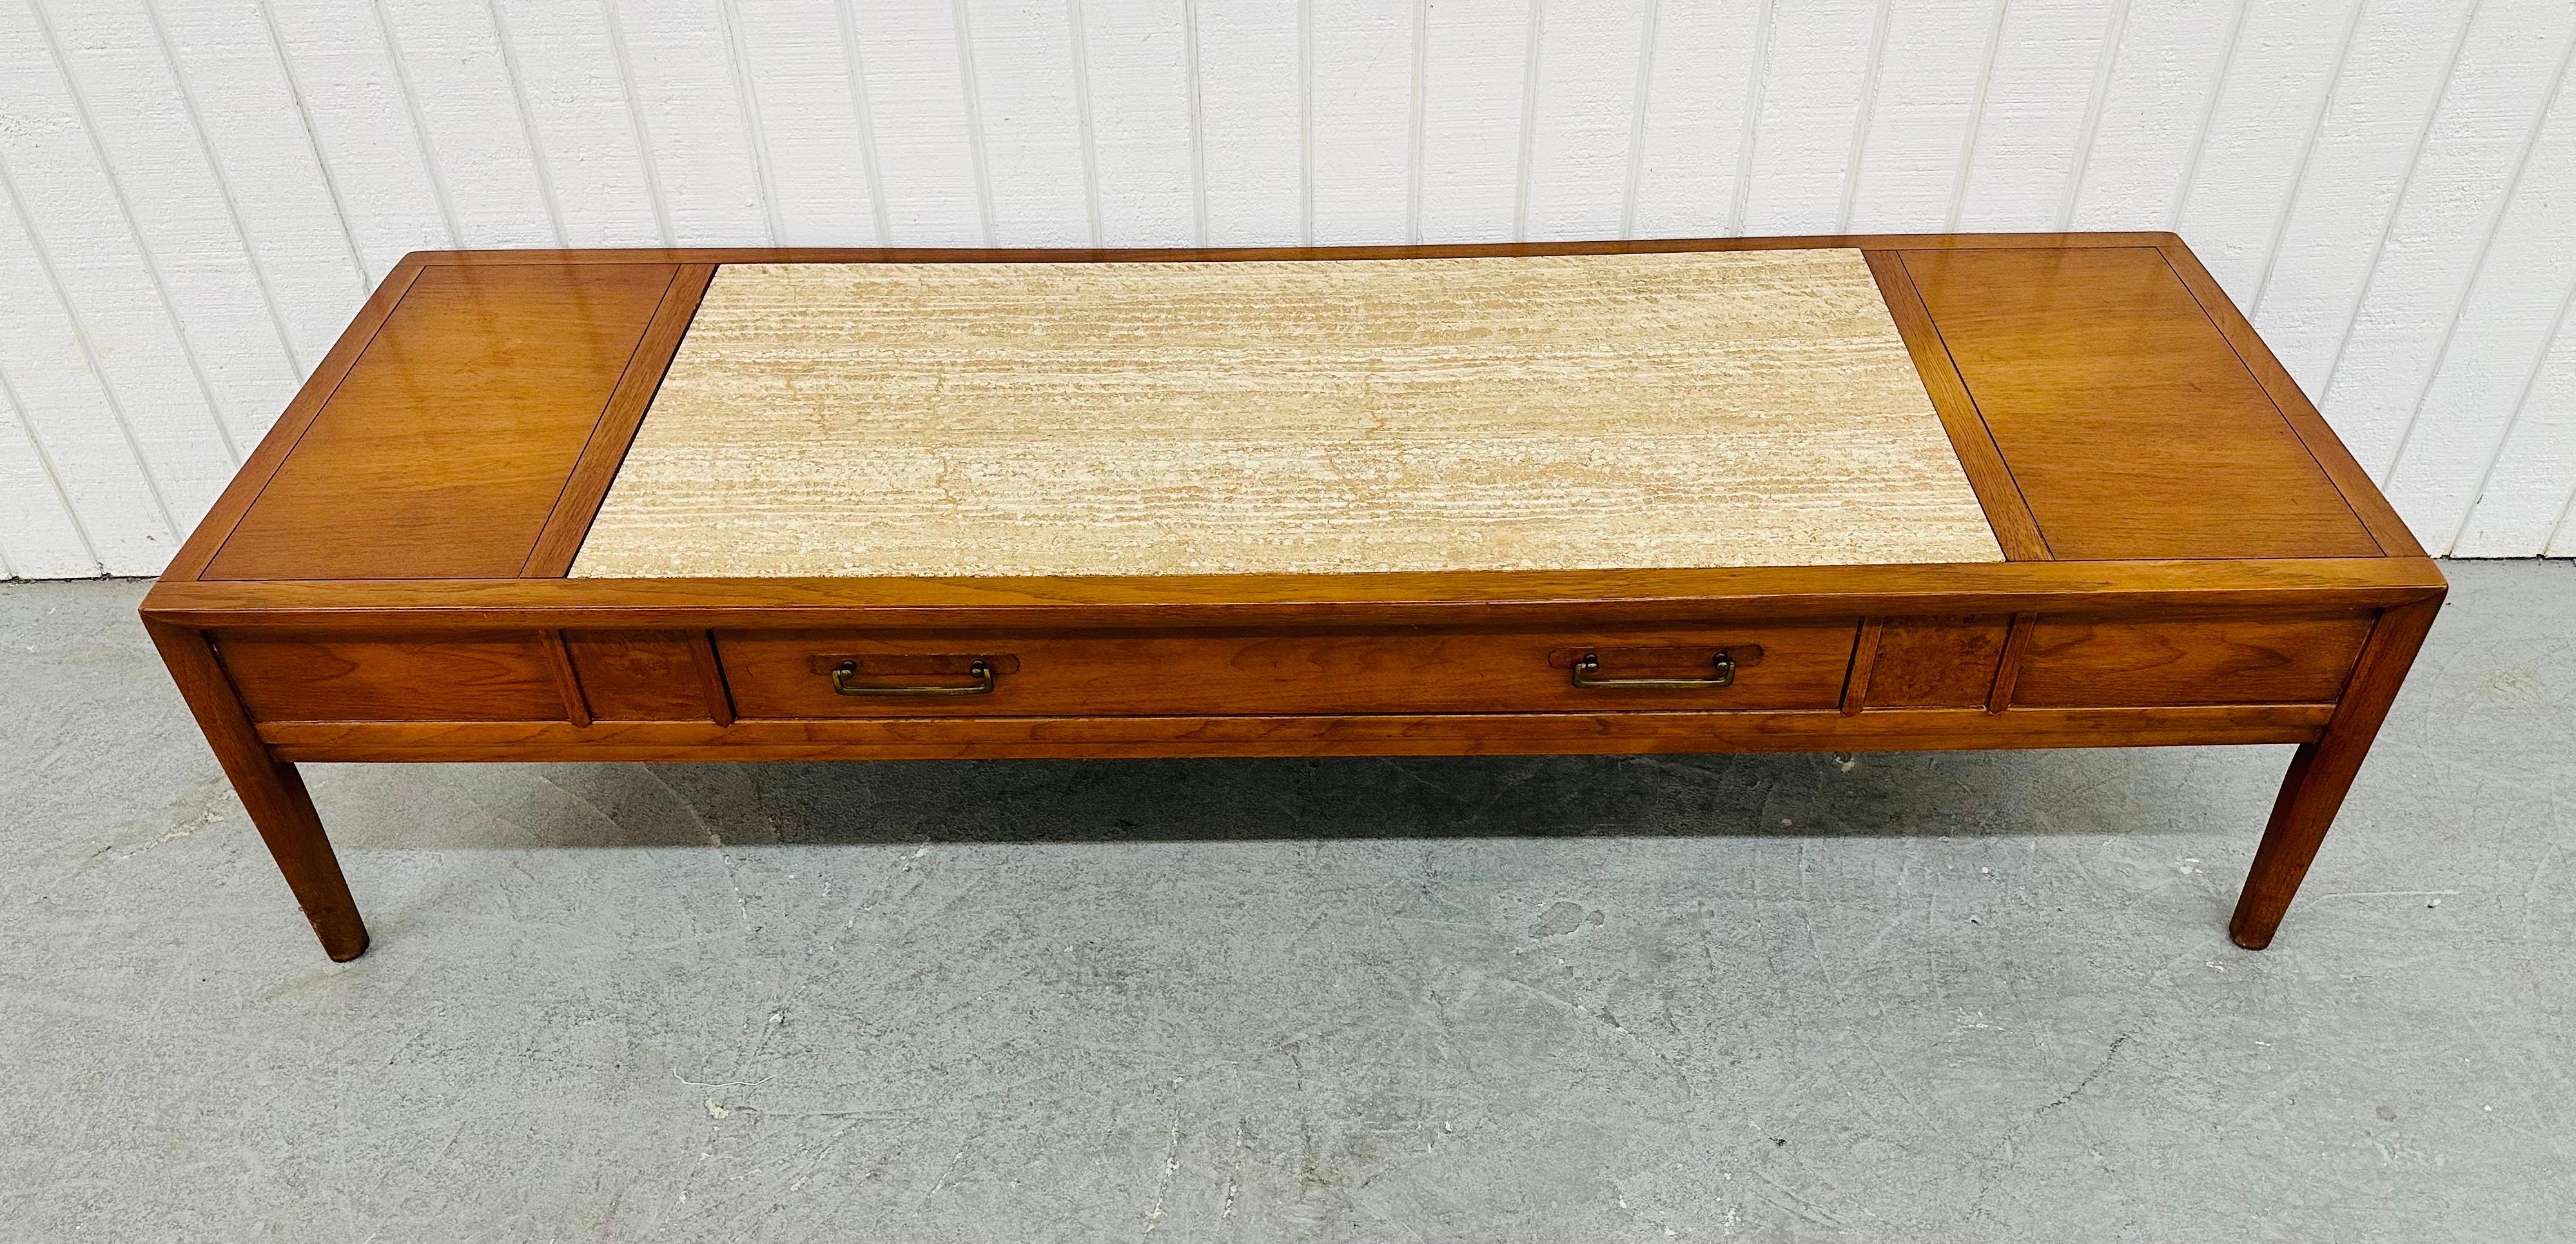 This listing is for a Vintage Drexel Walnut & Travertine Coffee Table. Featuring a straight line design, center travertine insert, single drawer for storage, original hardware, four modern legs, and a beautiful walnut finish. This is an exceptional